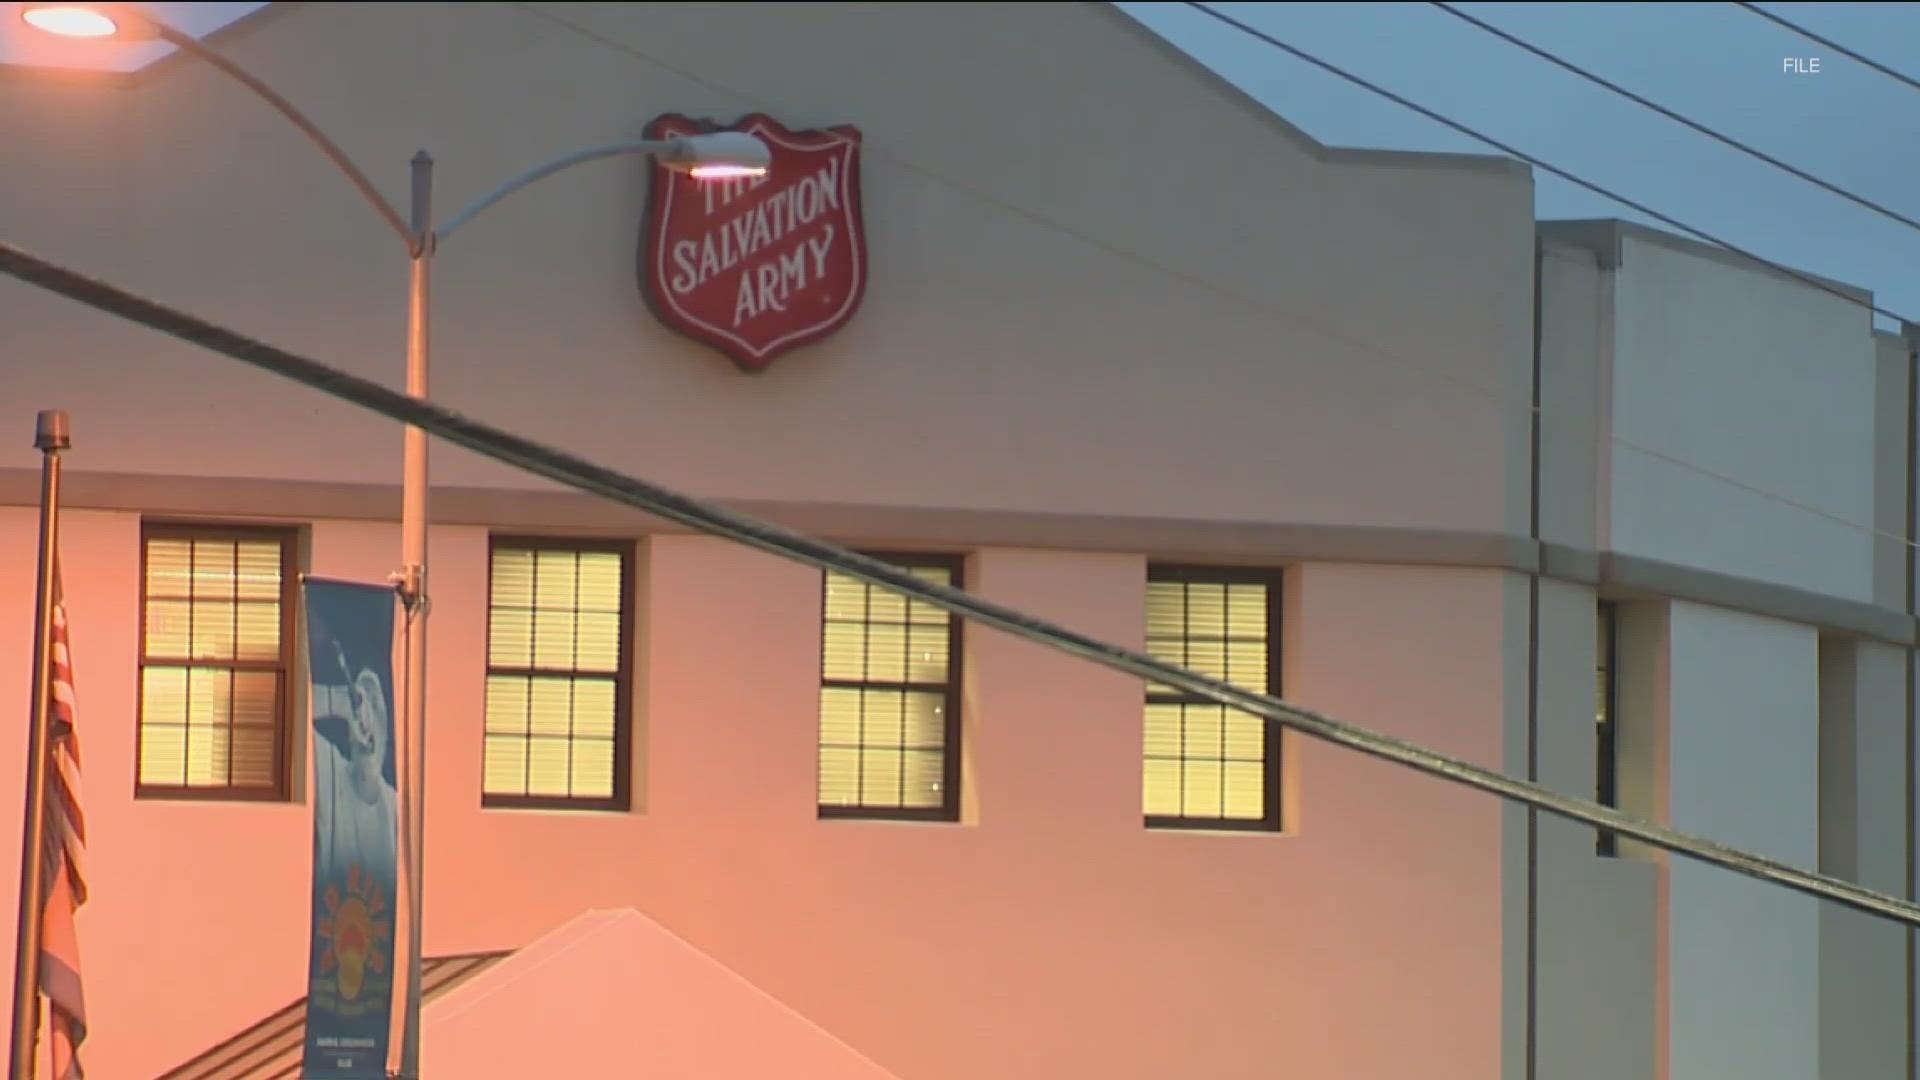 The Salvation Army plans to close its downtown homeless shelter.